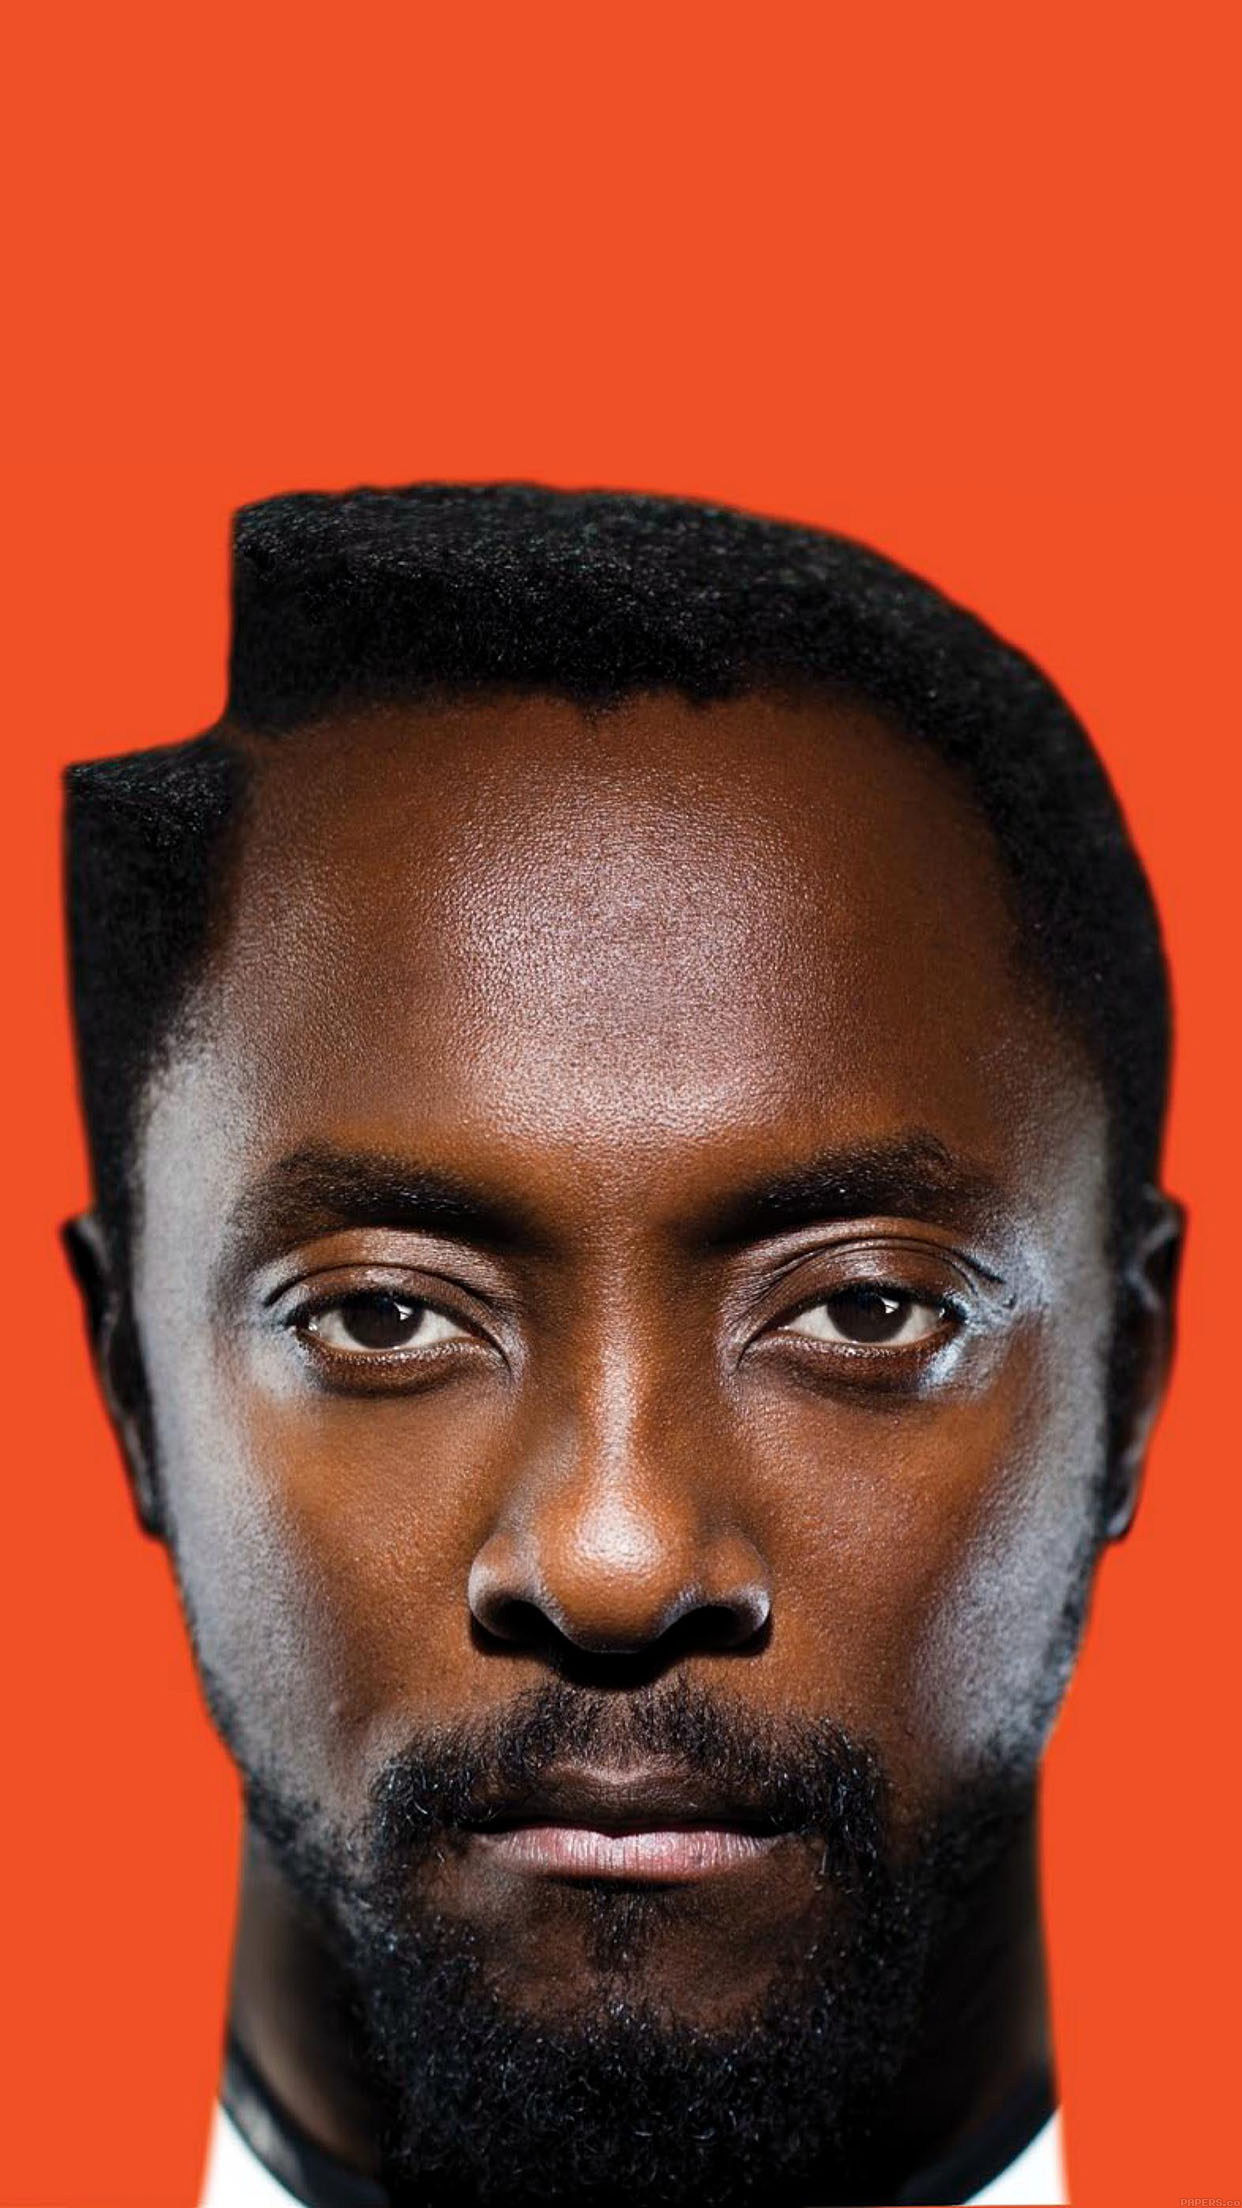 Wallpaper Will.i.am William Music Face Android wallpaper